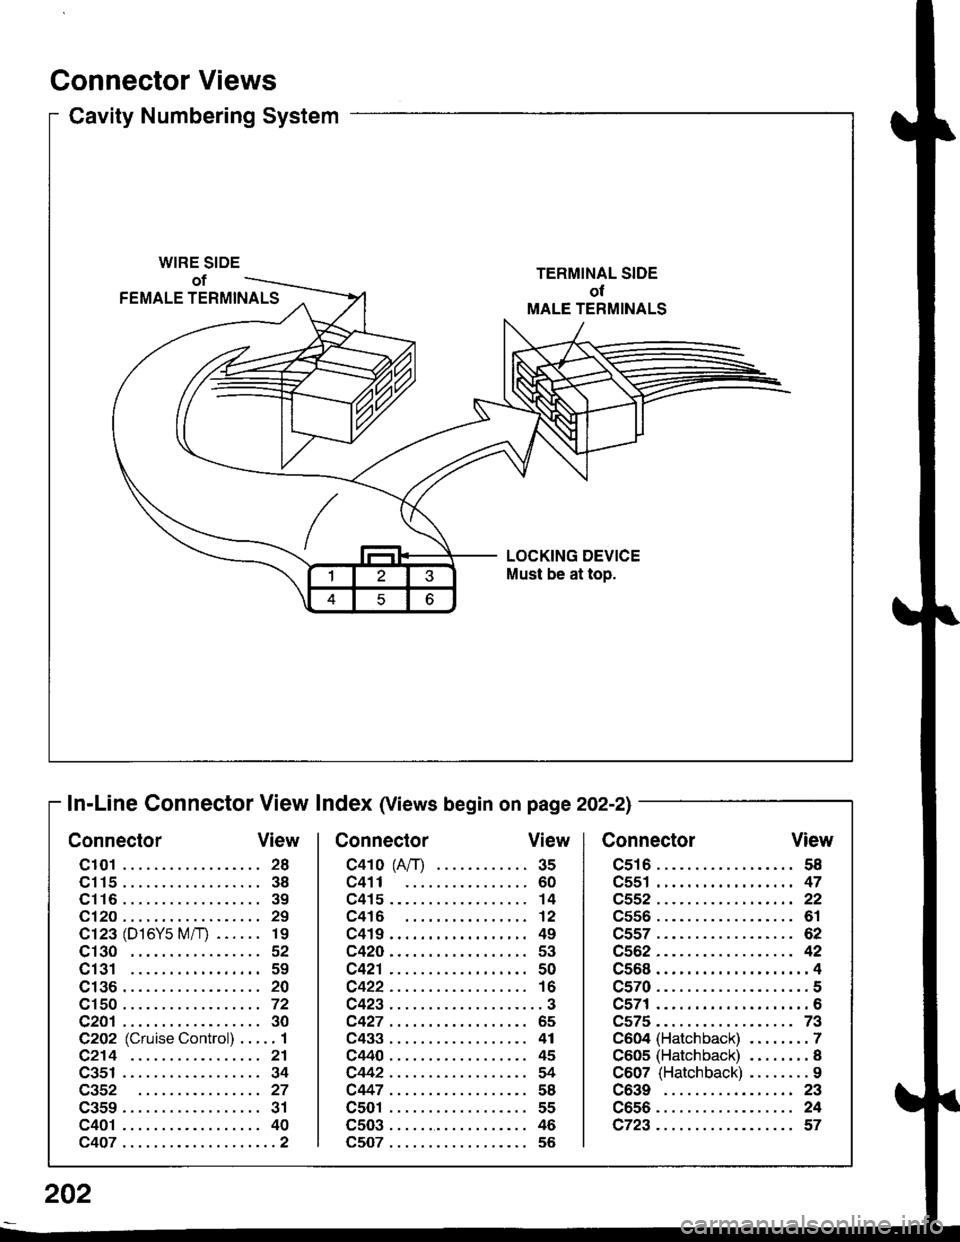 HONDA CIVIC 1996 6.G Workshop Manual Connector Views
Cavity Numbering Systemu
WIRE SIDE
ofTERMINAL SIDE
ot
MALE TERMINALSFEMALE TERMINALS
LOCKING DEVICE
Must be at top.
In-Line Connector View Index (views begi202-2)
Connector View
cs16..